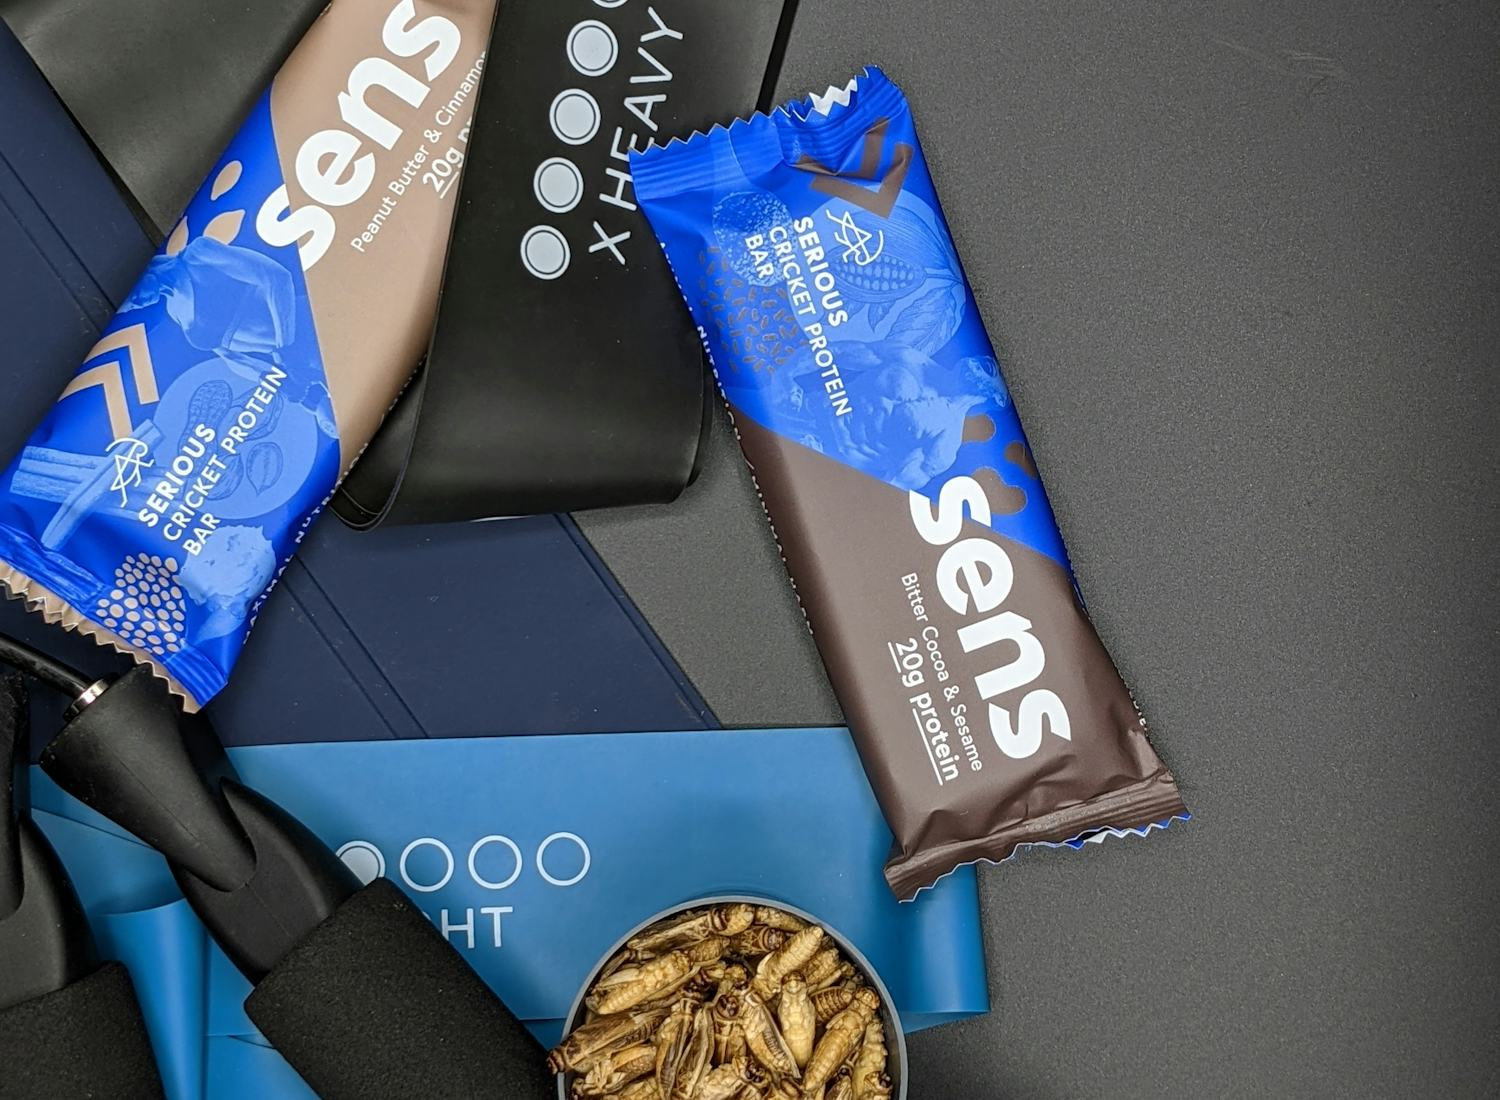 Home workout equipment and the Sens Serious Cricket Protein Bars